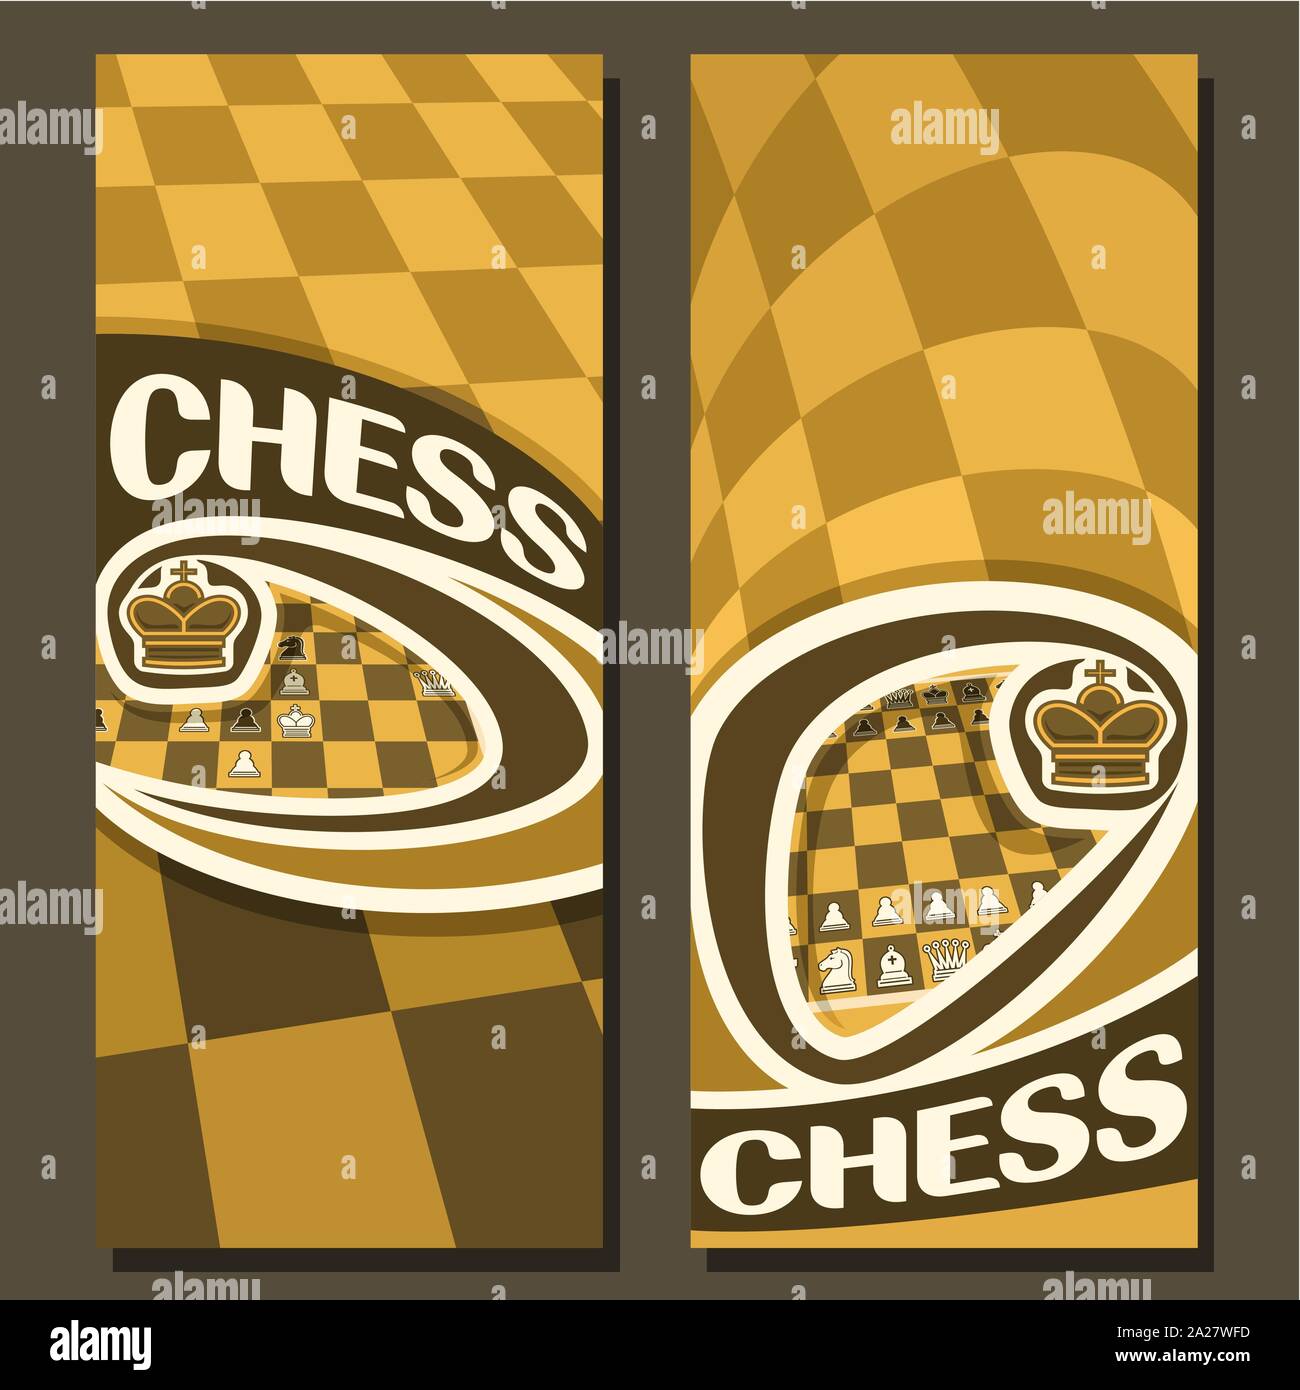 Vector vertical banners for Chess game with copy space, in layouts yellow & brown curved checkerboard squares for title on chess theme, original font Stock Vector